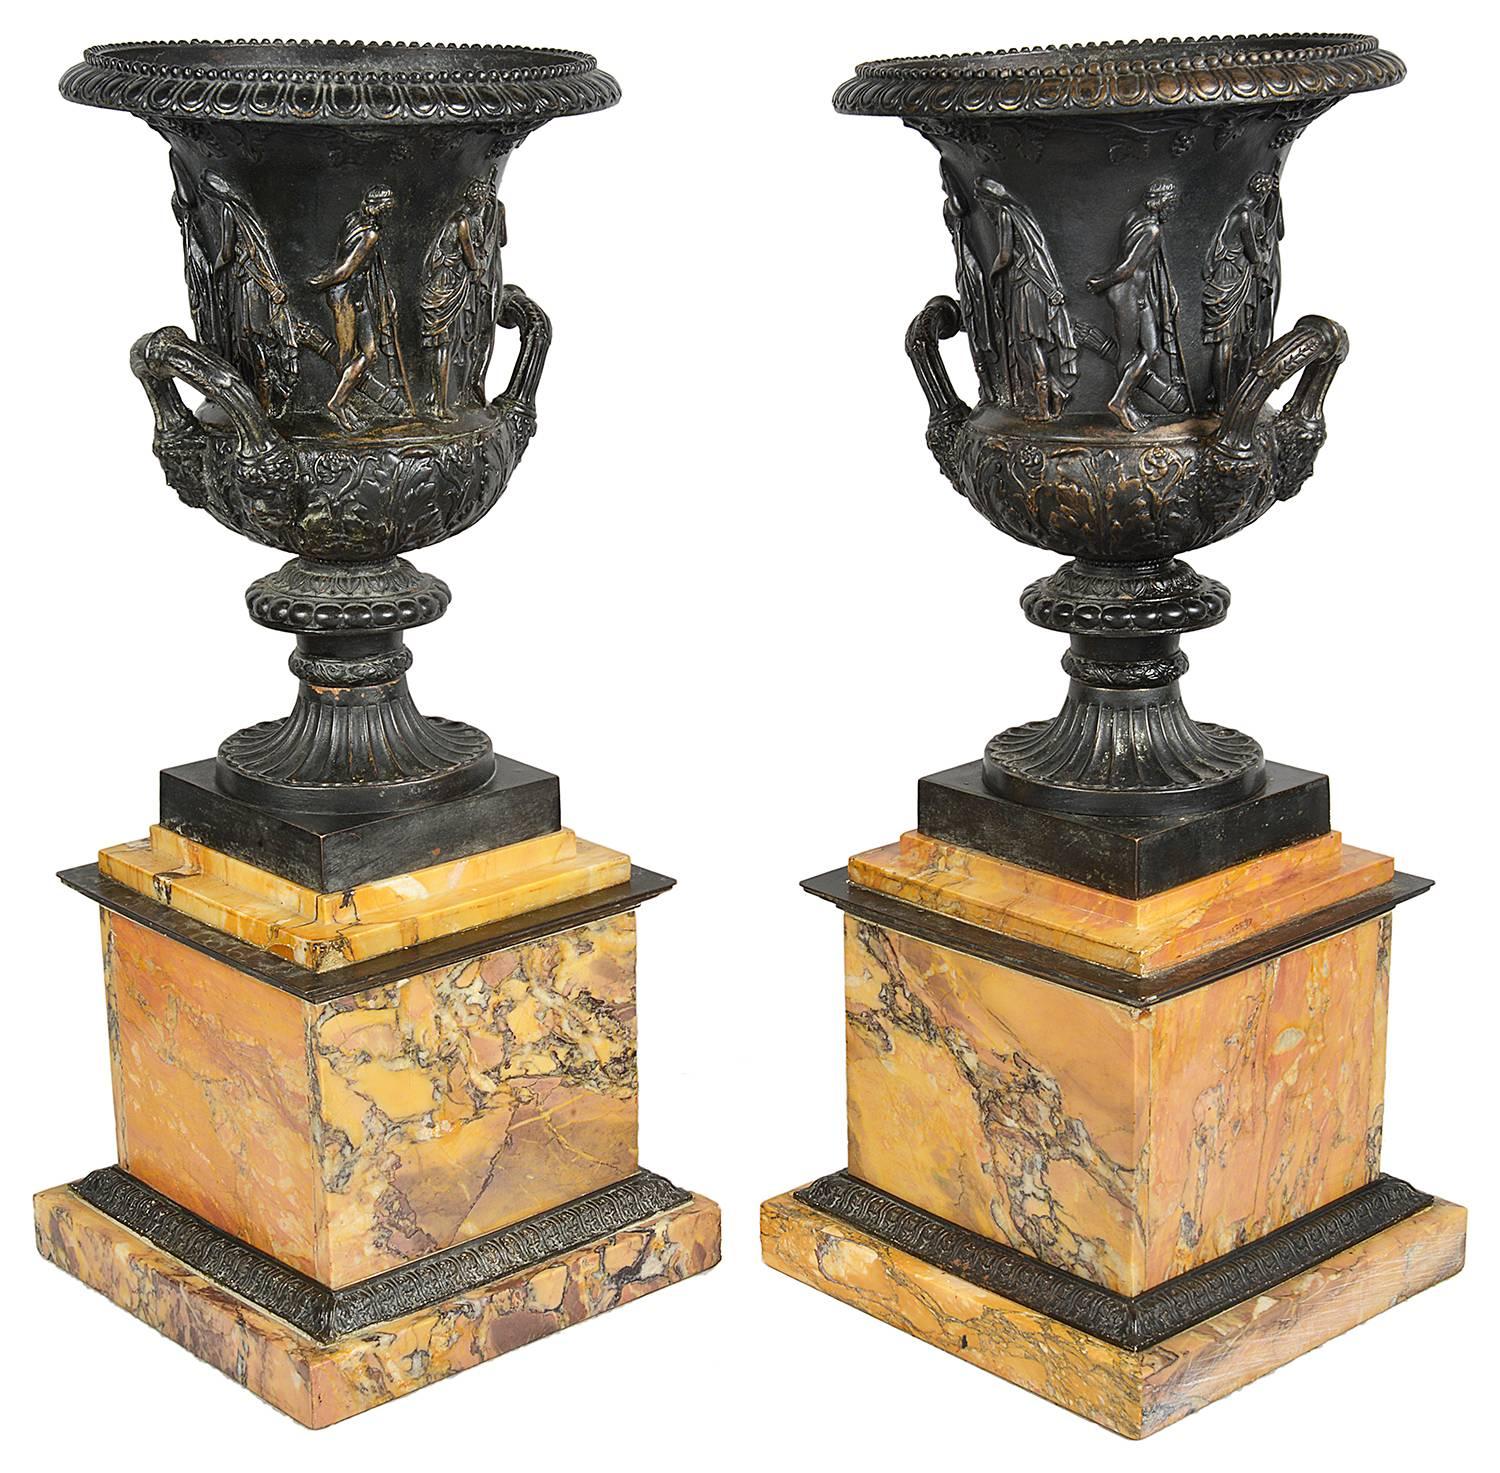 An impressive large pair of classical bronze urns, after the Medici and Borghese models. Each mounted on Sienna marble plinths.